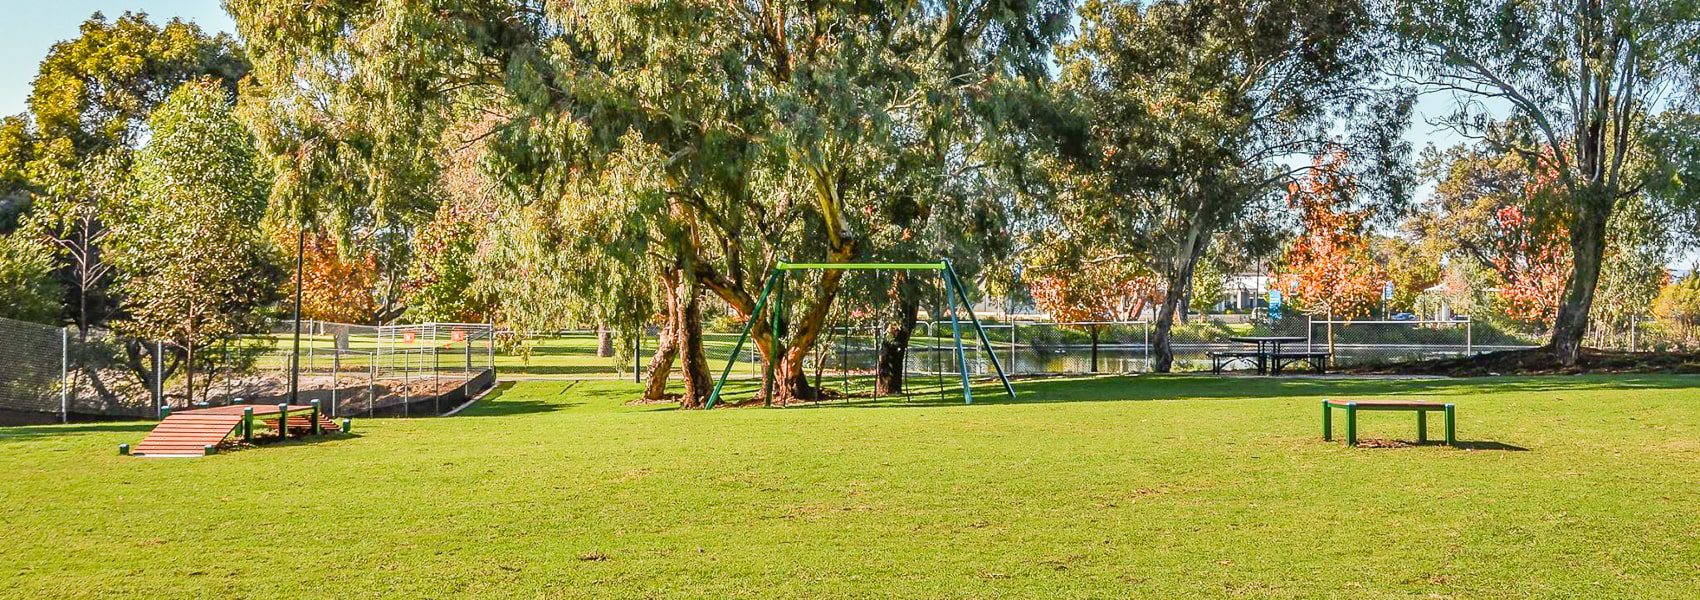 Aveley Dog Park in Perth's northern suburbs